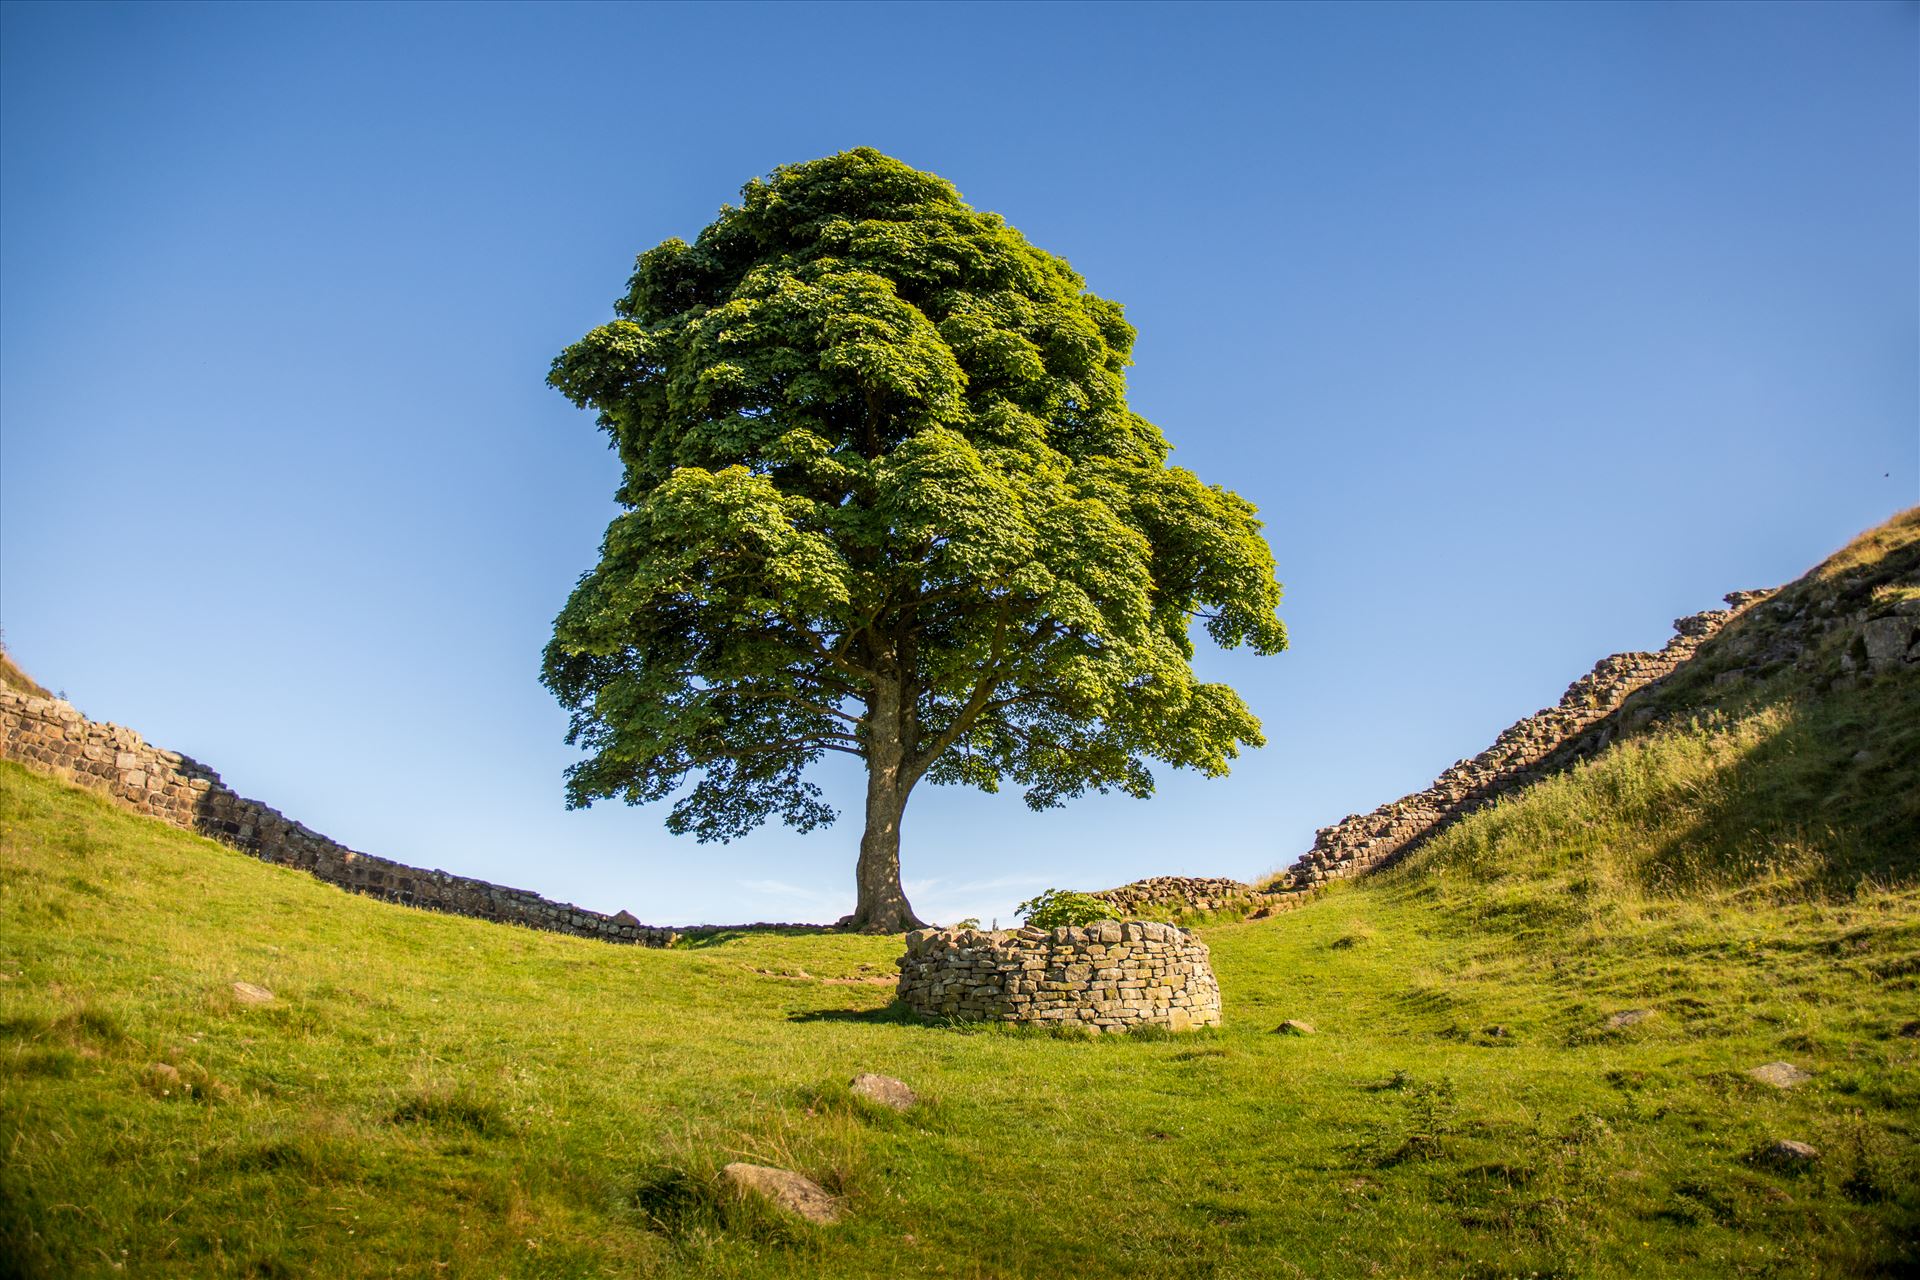 Sycamore Gap Sycamore Gap sits on the Roman Wall near the fort of Housesteads. It was made famous by the film Robin Hood: Prince of Thieves by philreay